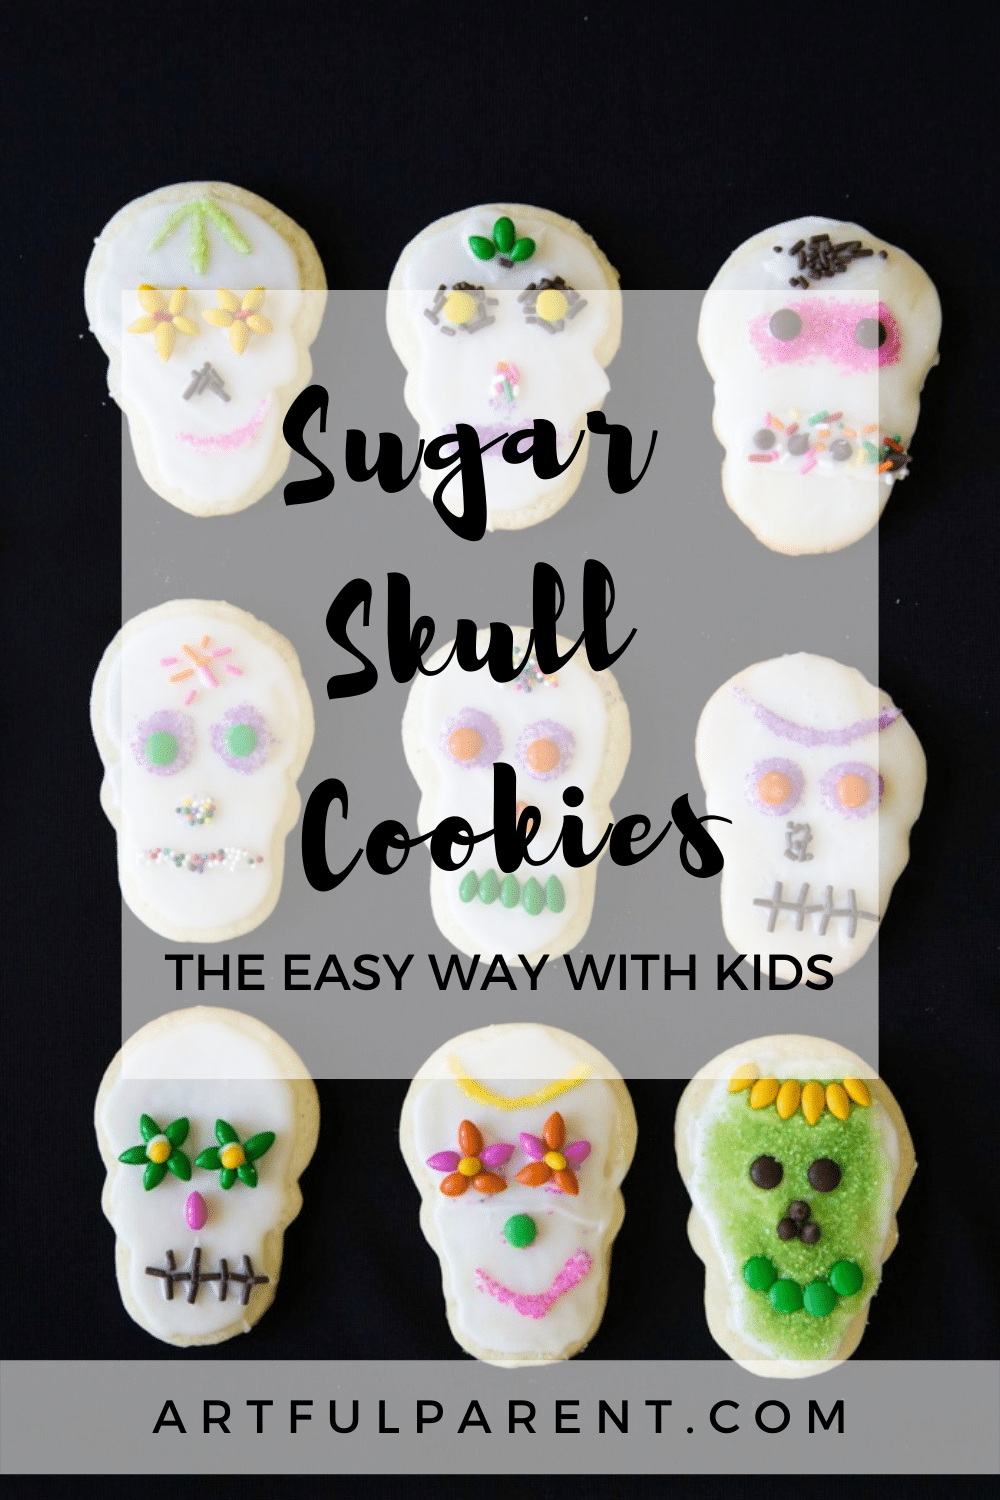 Sugar Skull Cookies the Easy Way with Kids